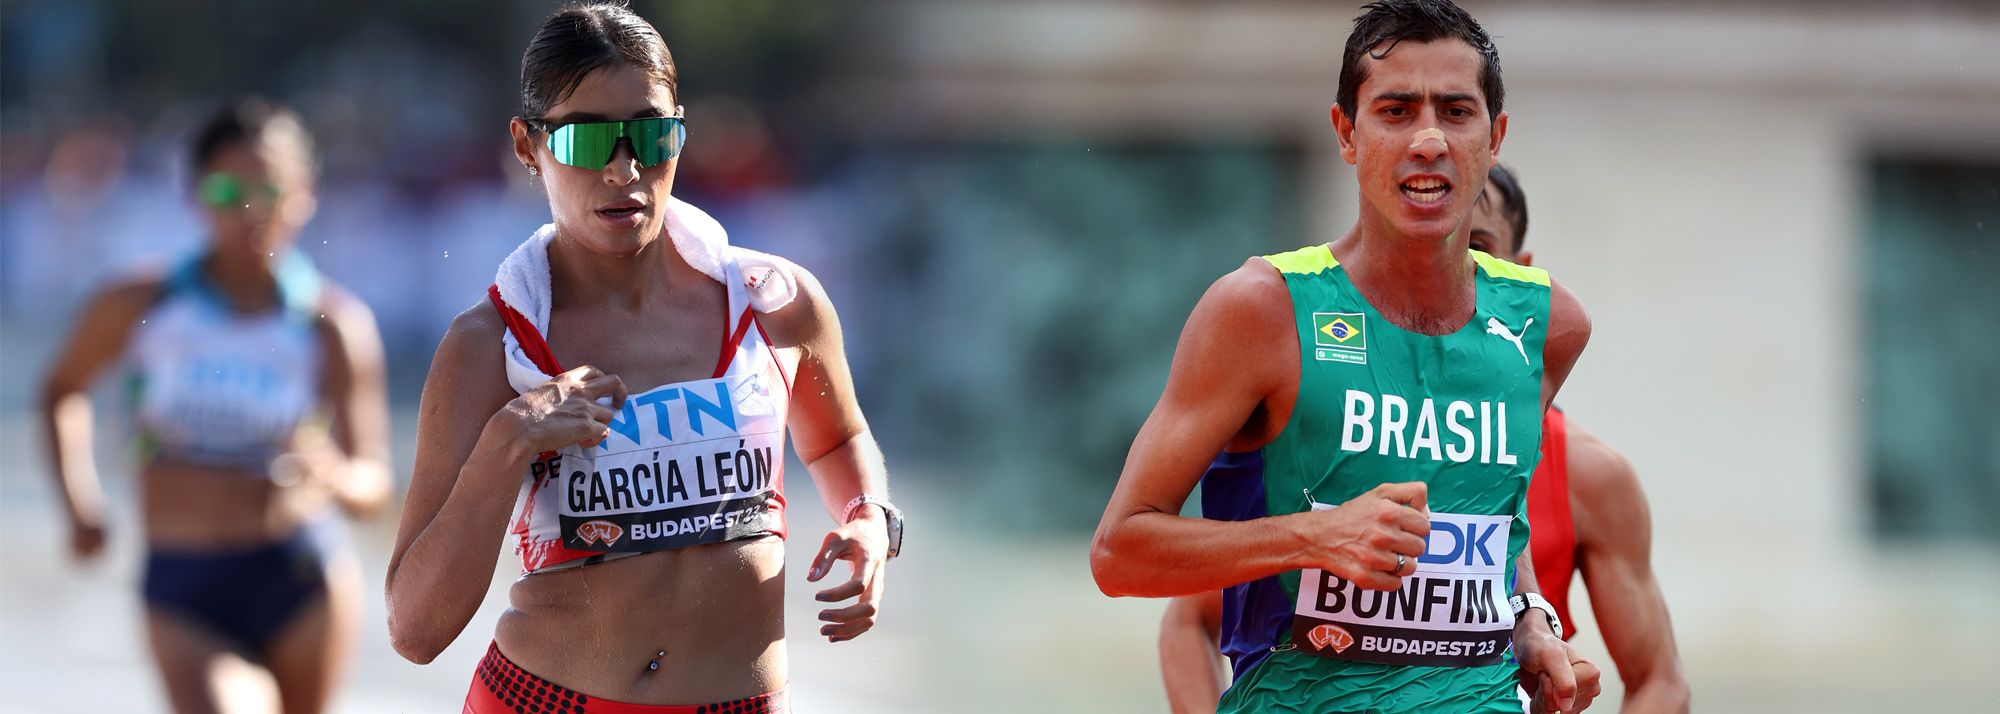 Peru’s Kimberly Garcia and Brazil’s Caio Bonfim have been confirmed as the overall winners in the 2022-2023 World Athletics Race Walking Tour.